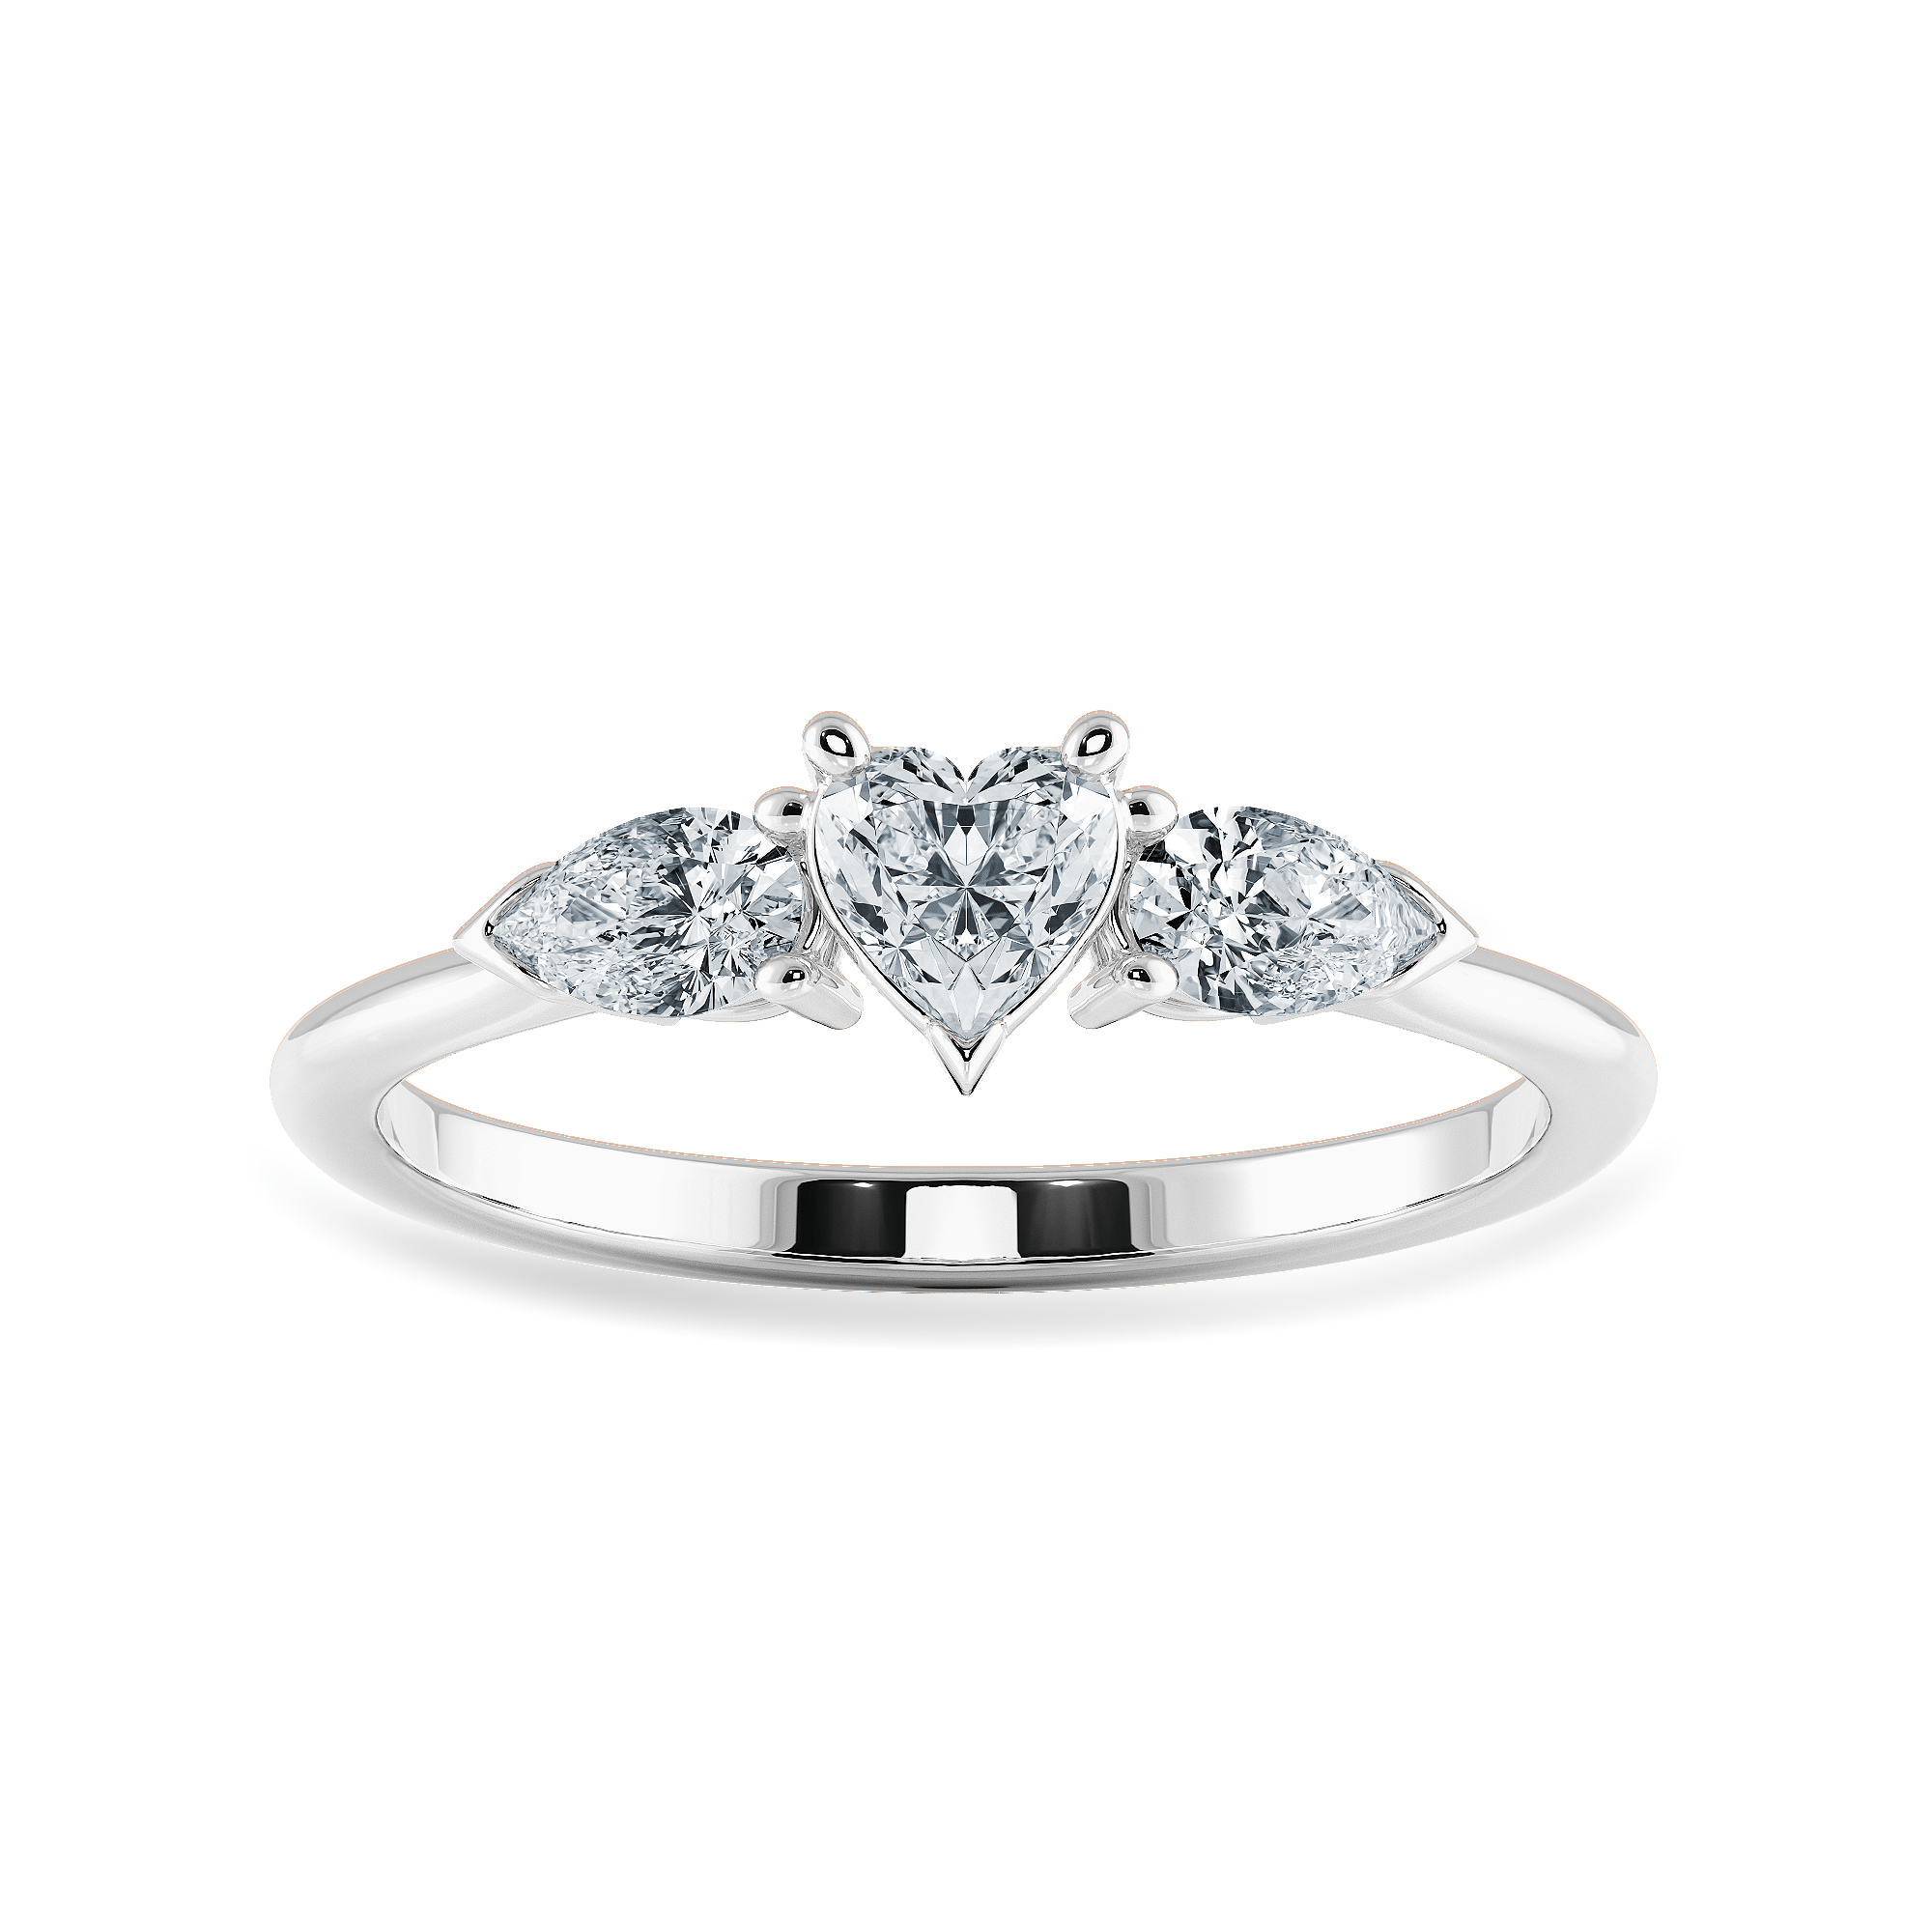 The Heart-Shaped Engagement Ring – A Symbol of Love